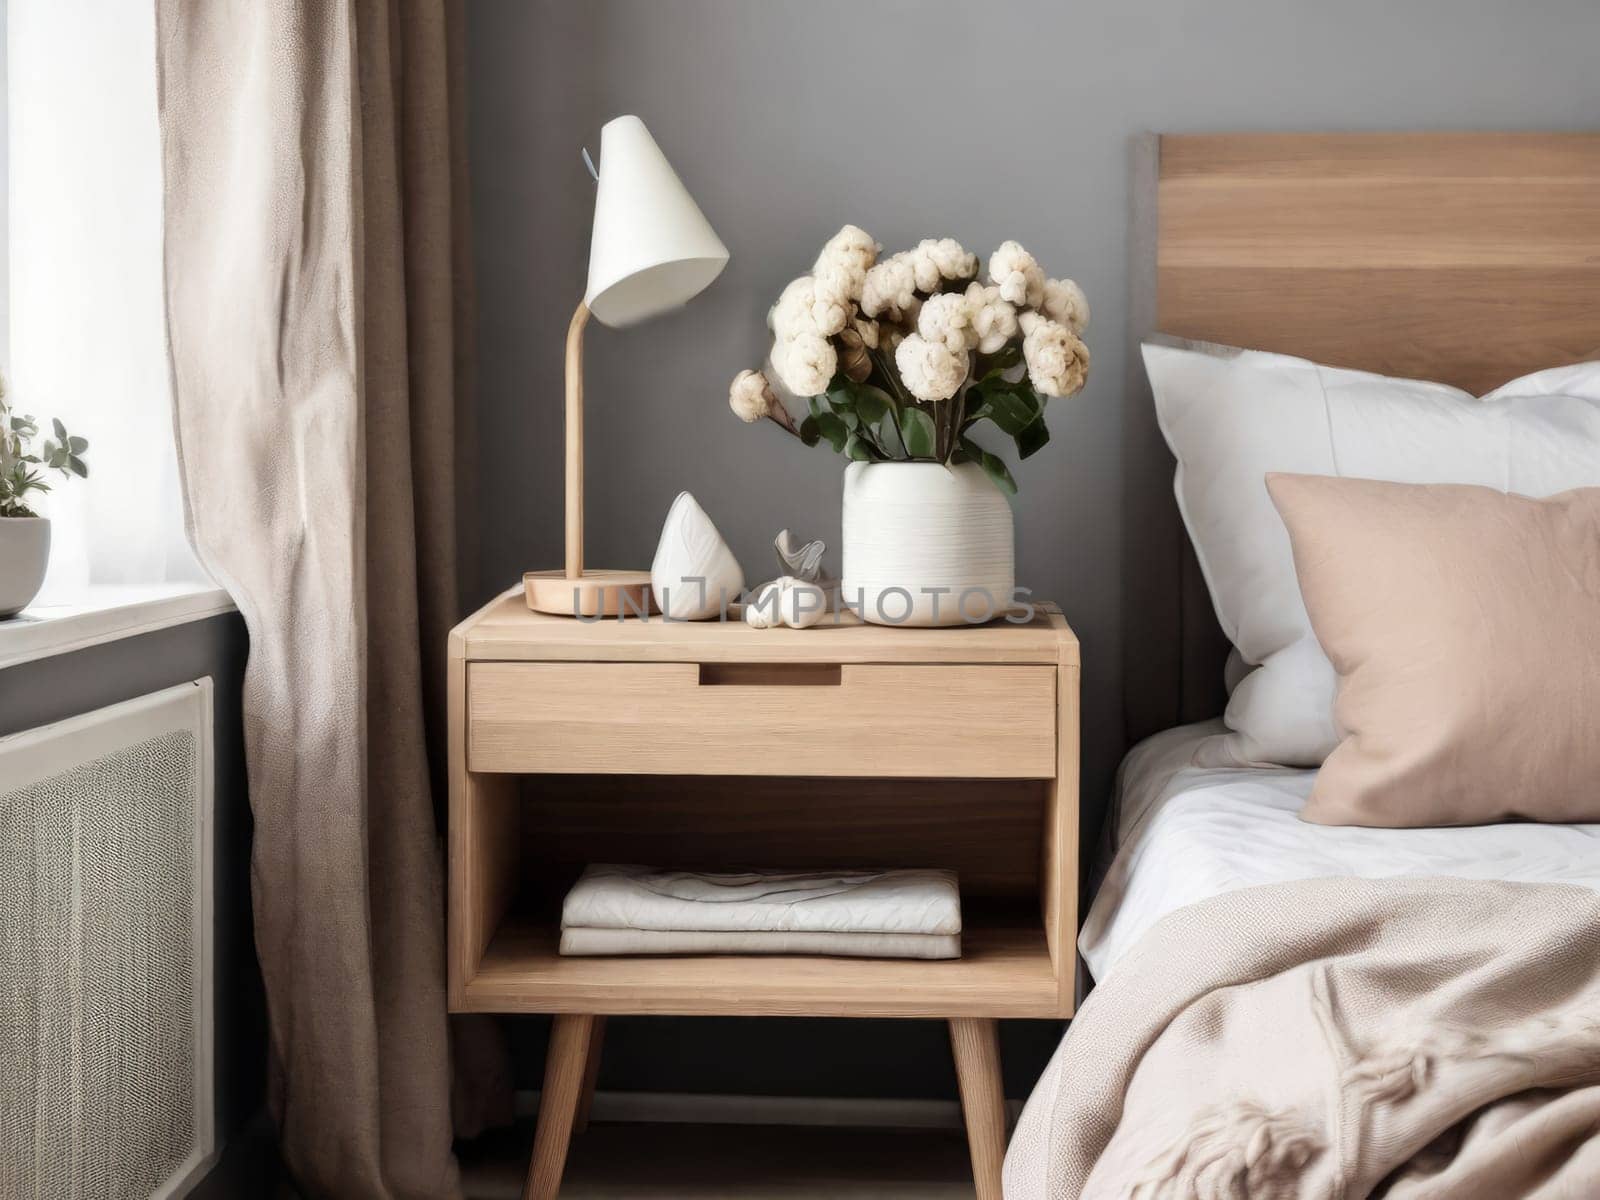 Delicate bedside decor with a lamp and floral arrangement, exuding a calming ambiance in the Scandinavian-style bedroom setting